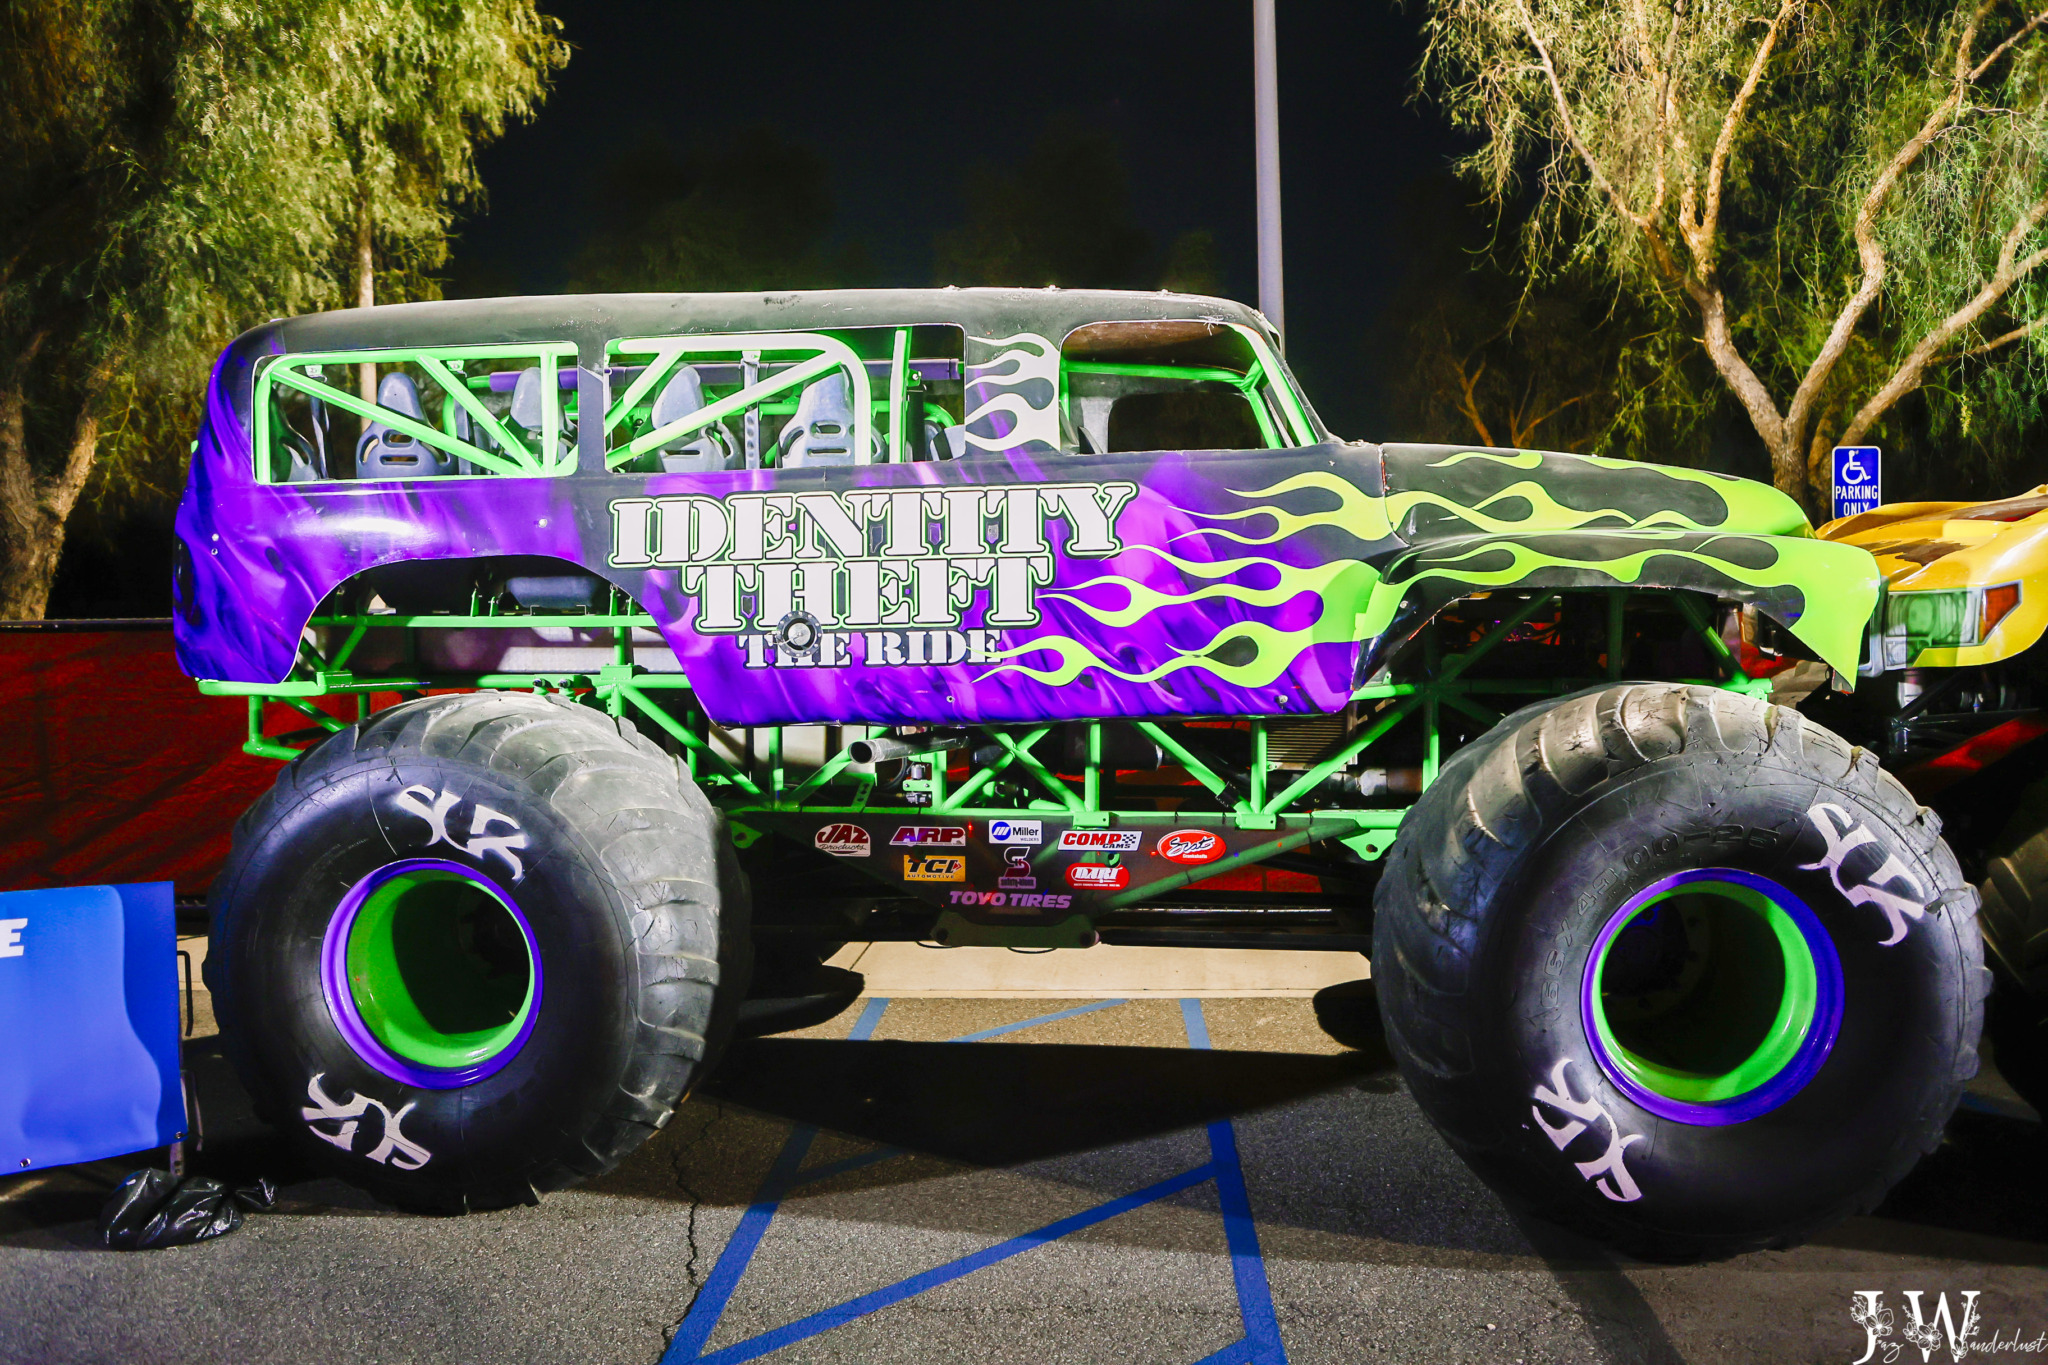 Monster trucks at Hot Wheels event in SoCal. Photography by Jaz Wanderlust.